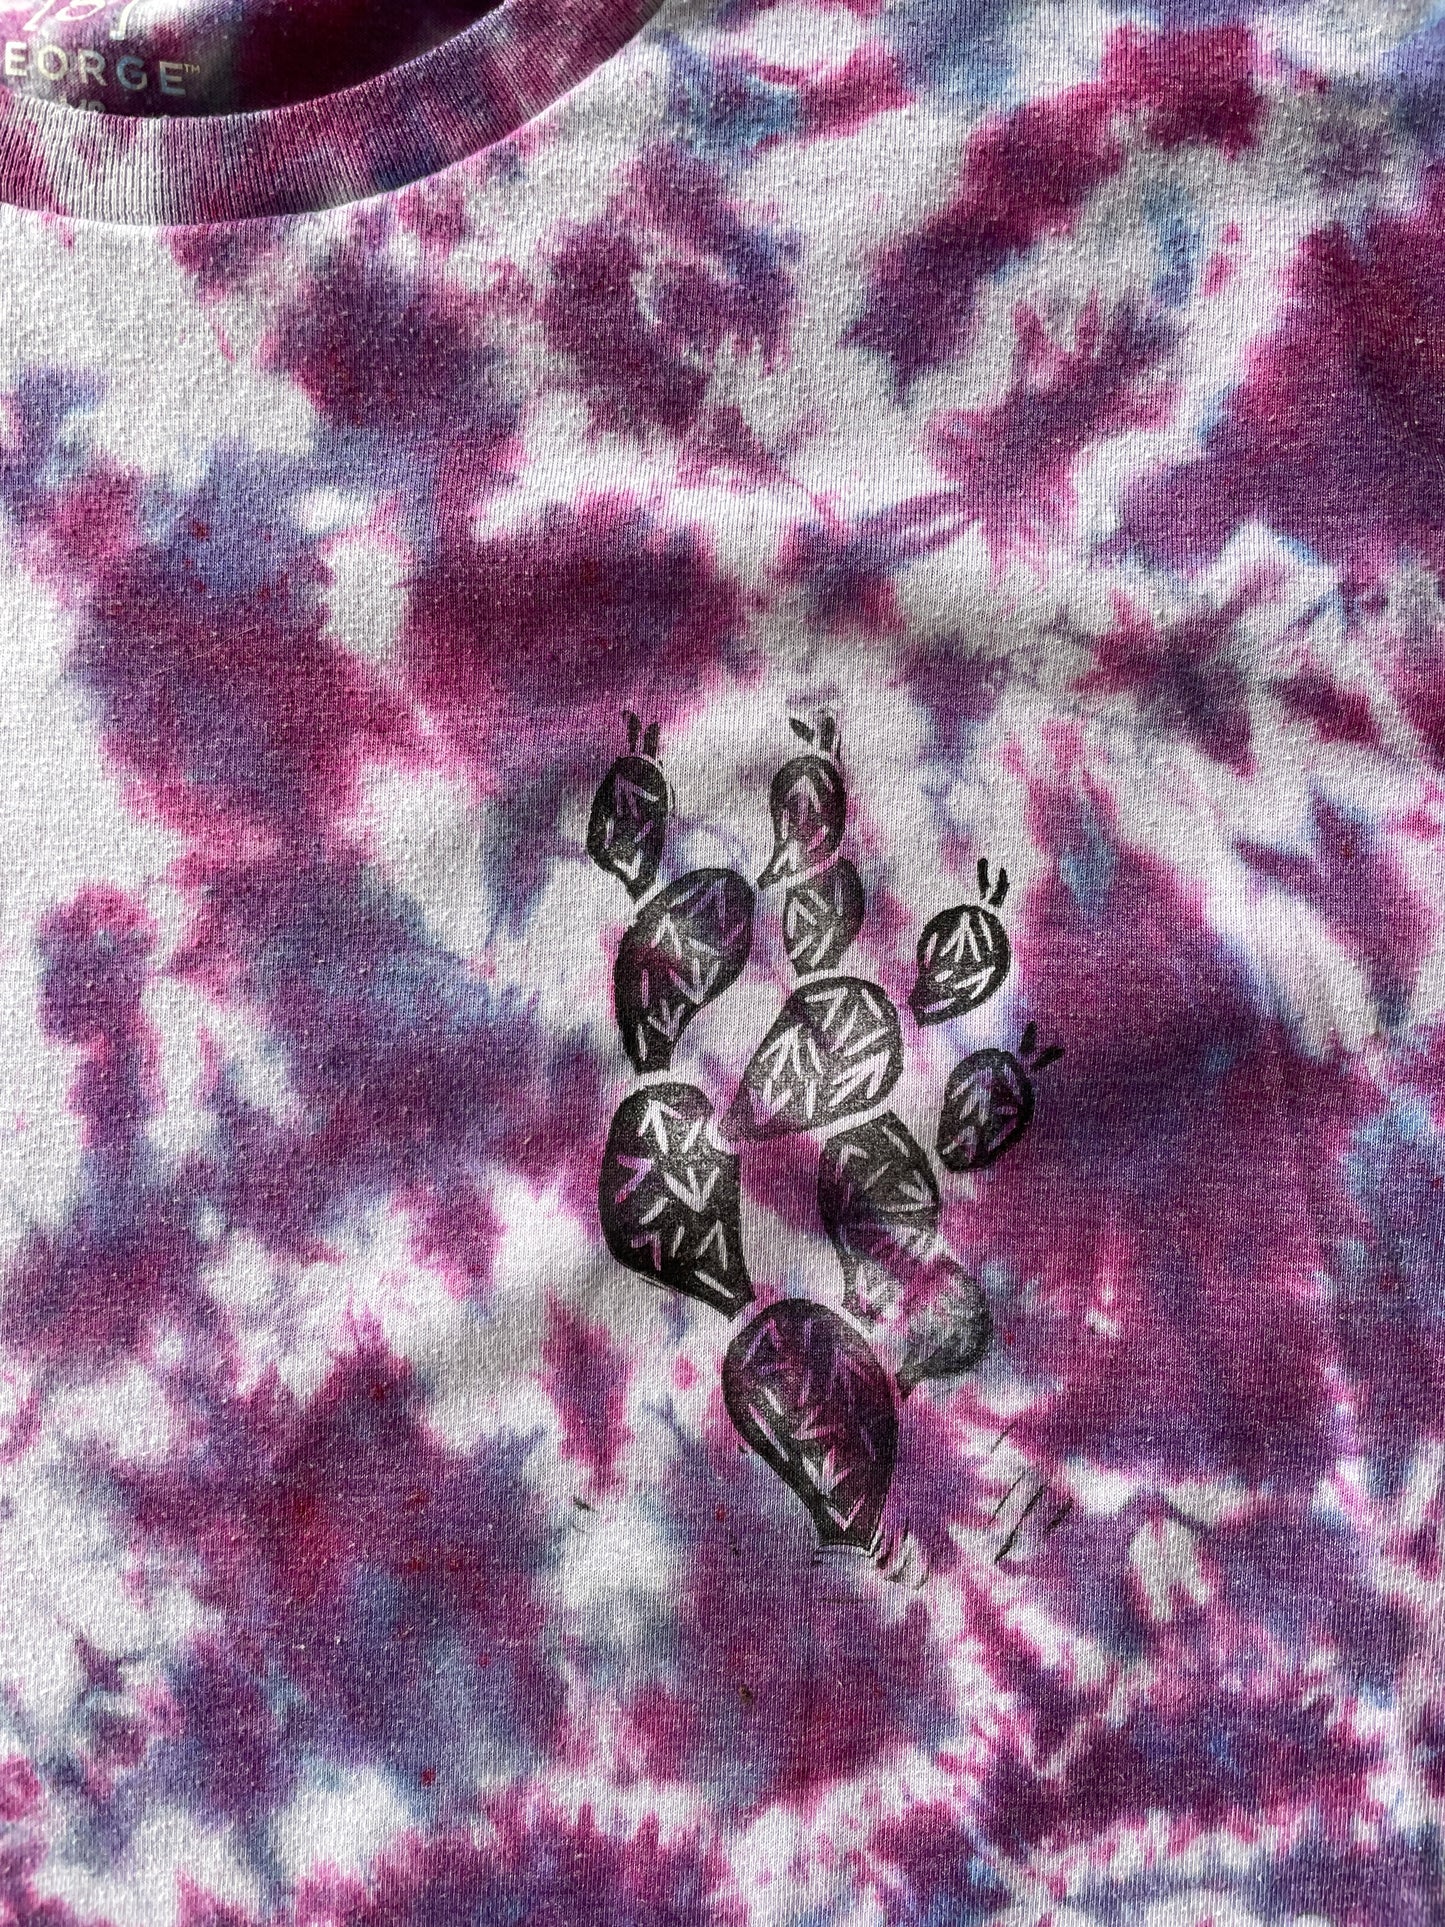 LARGE Men's Prickly Pear Cactus Tie Dye T-Shirt | One-Of-a-Kind Shades of Purple Crumpled Short Sleeve